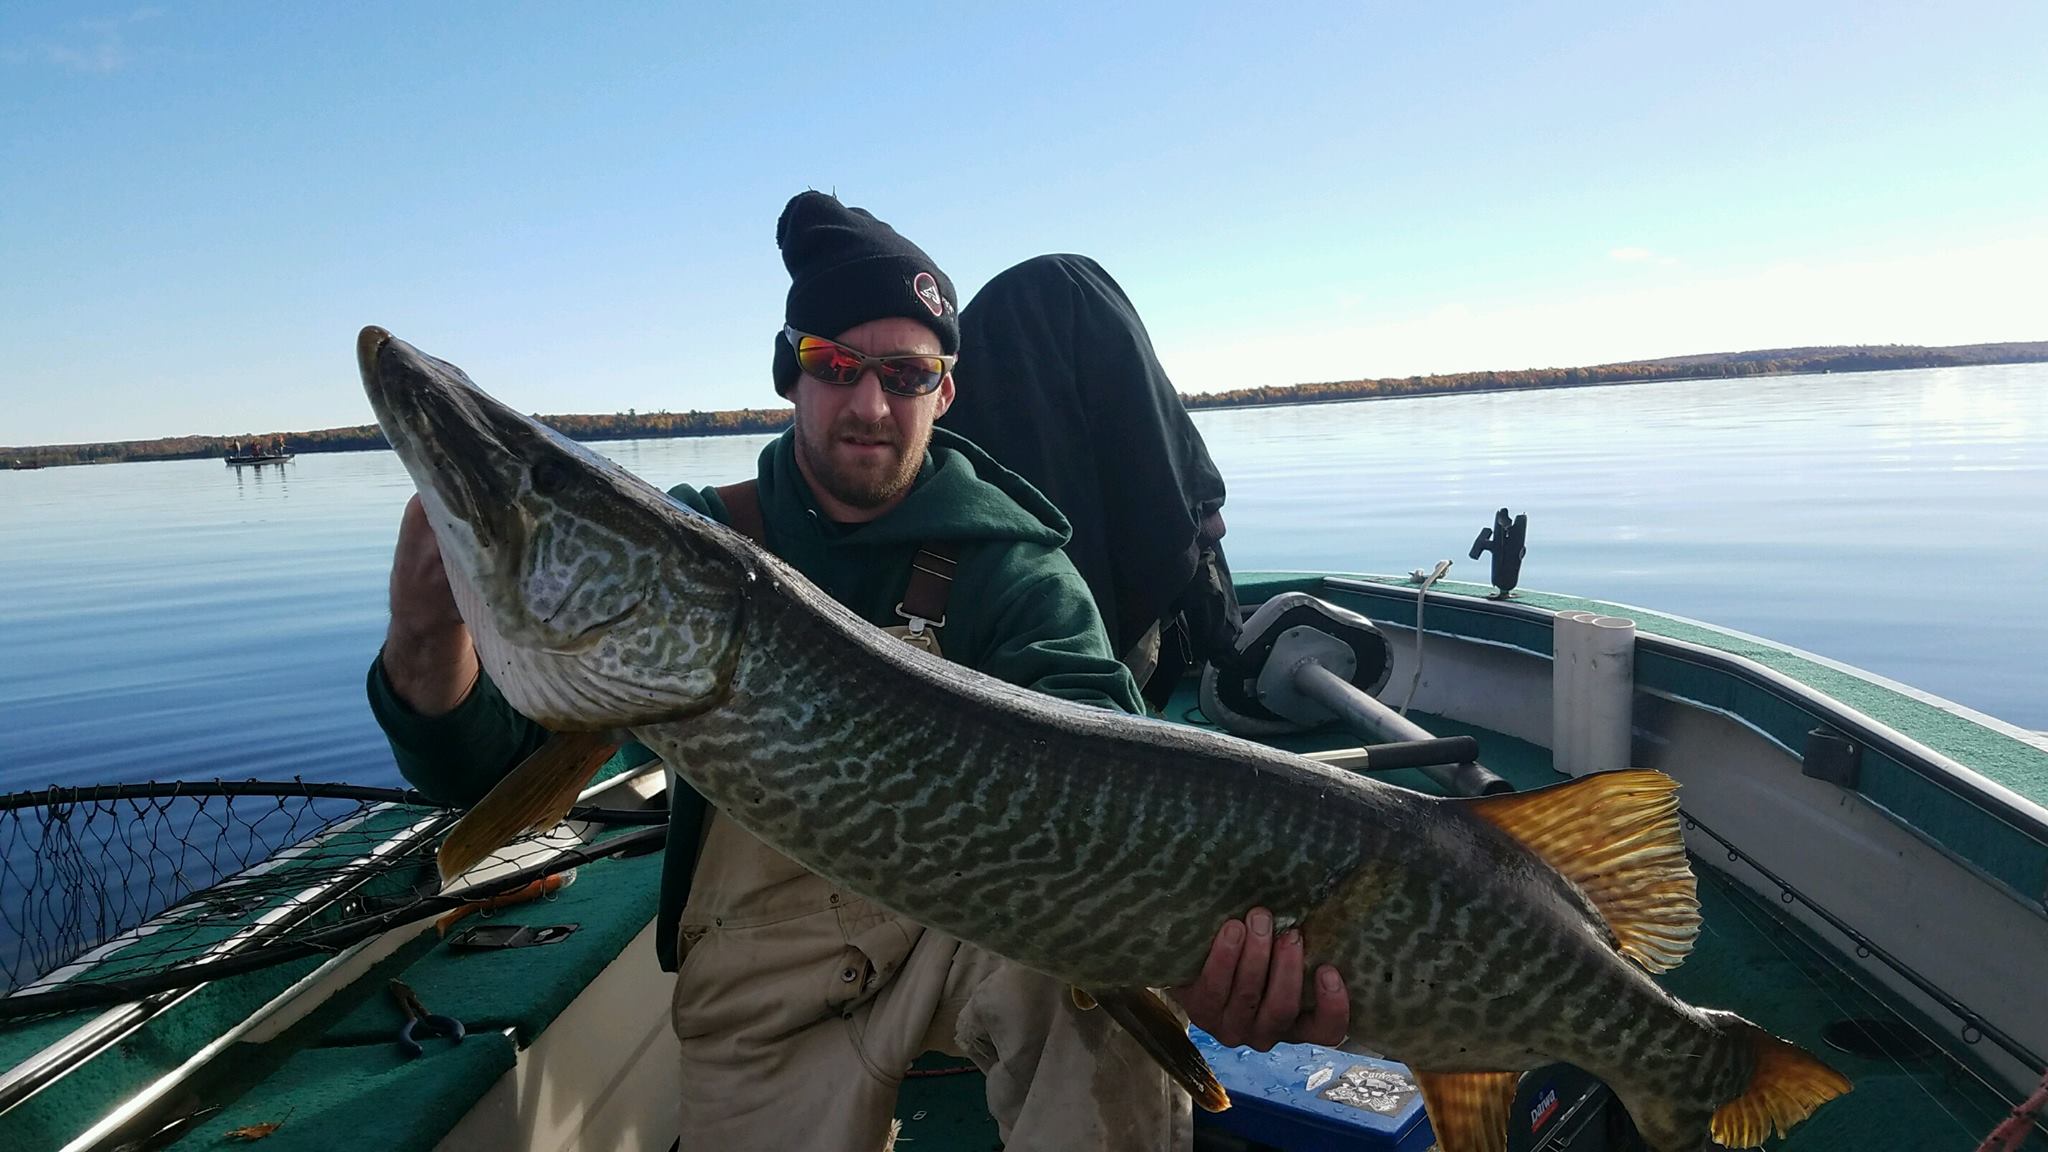 39th Midwest Musky Classic Tournament October 4th MuskieFIRST